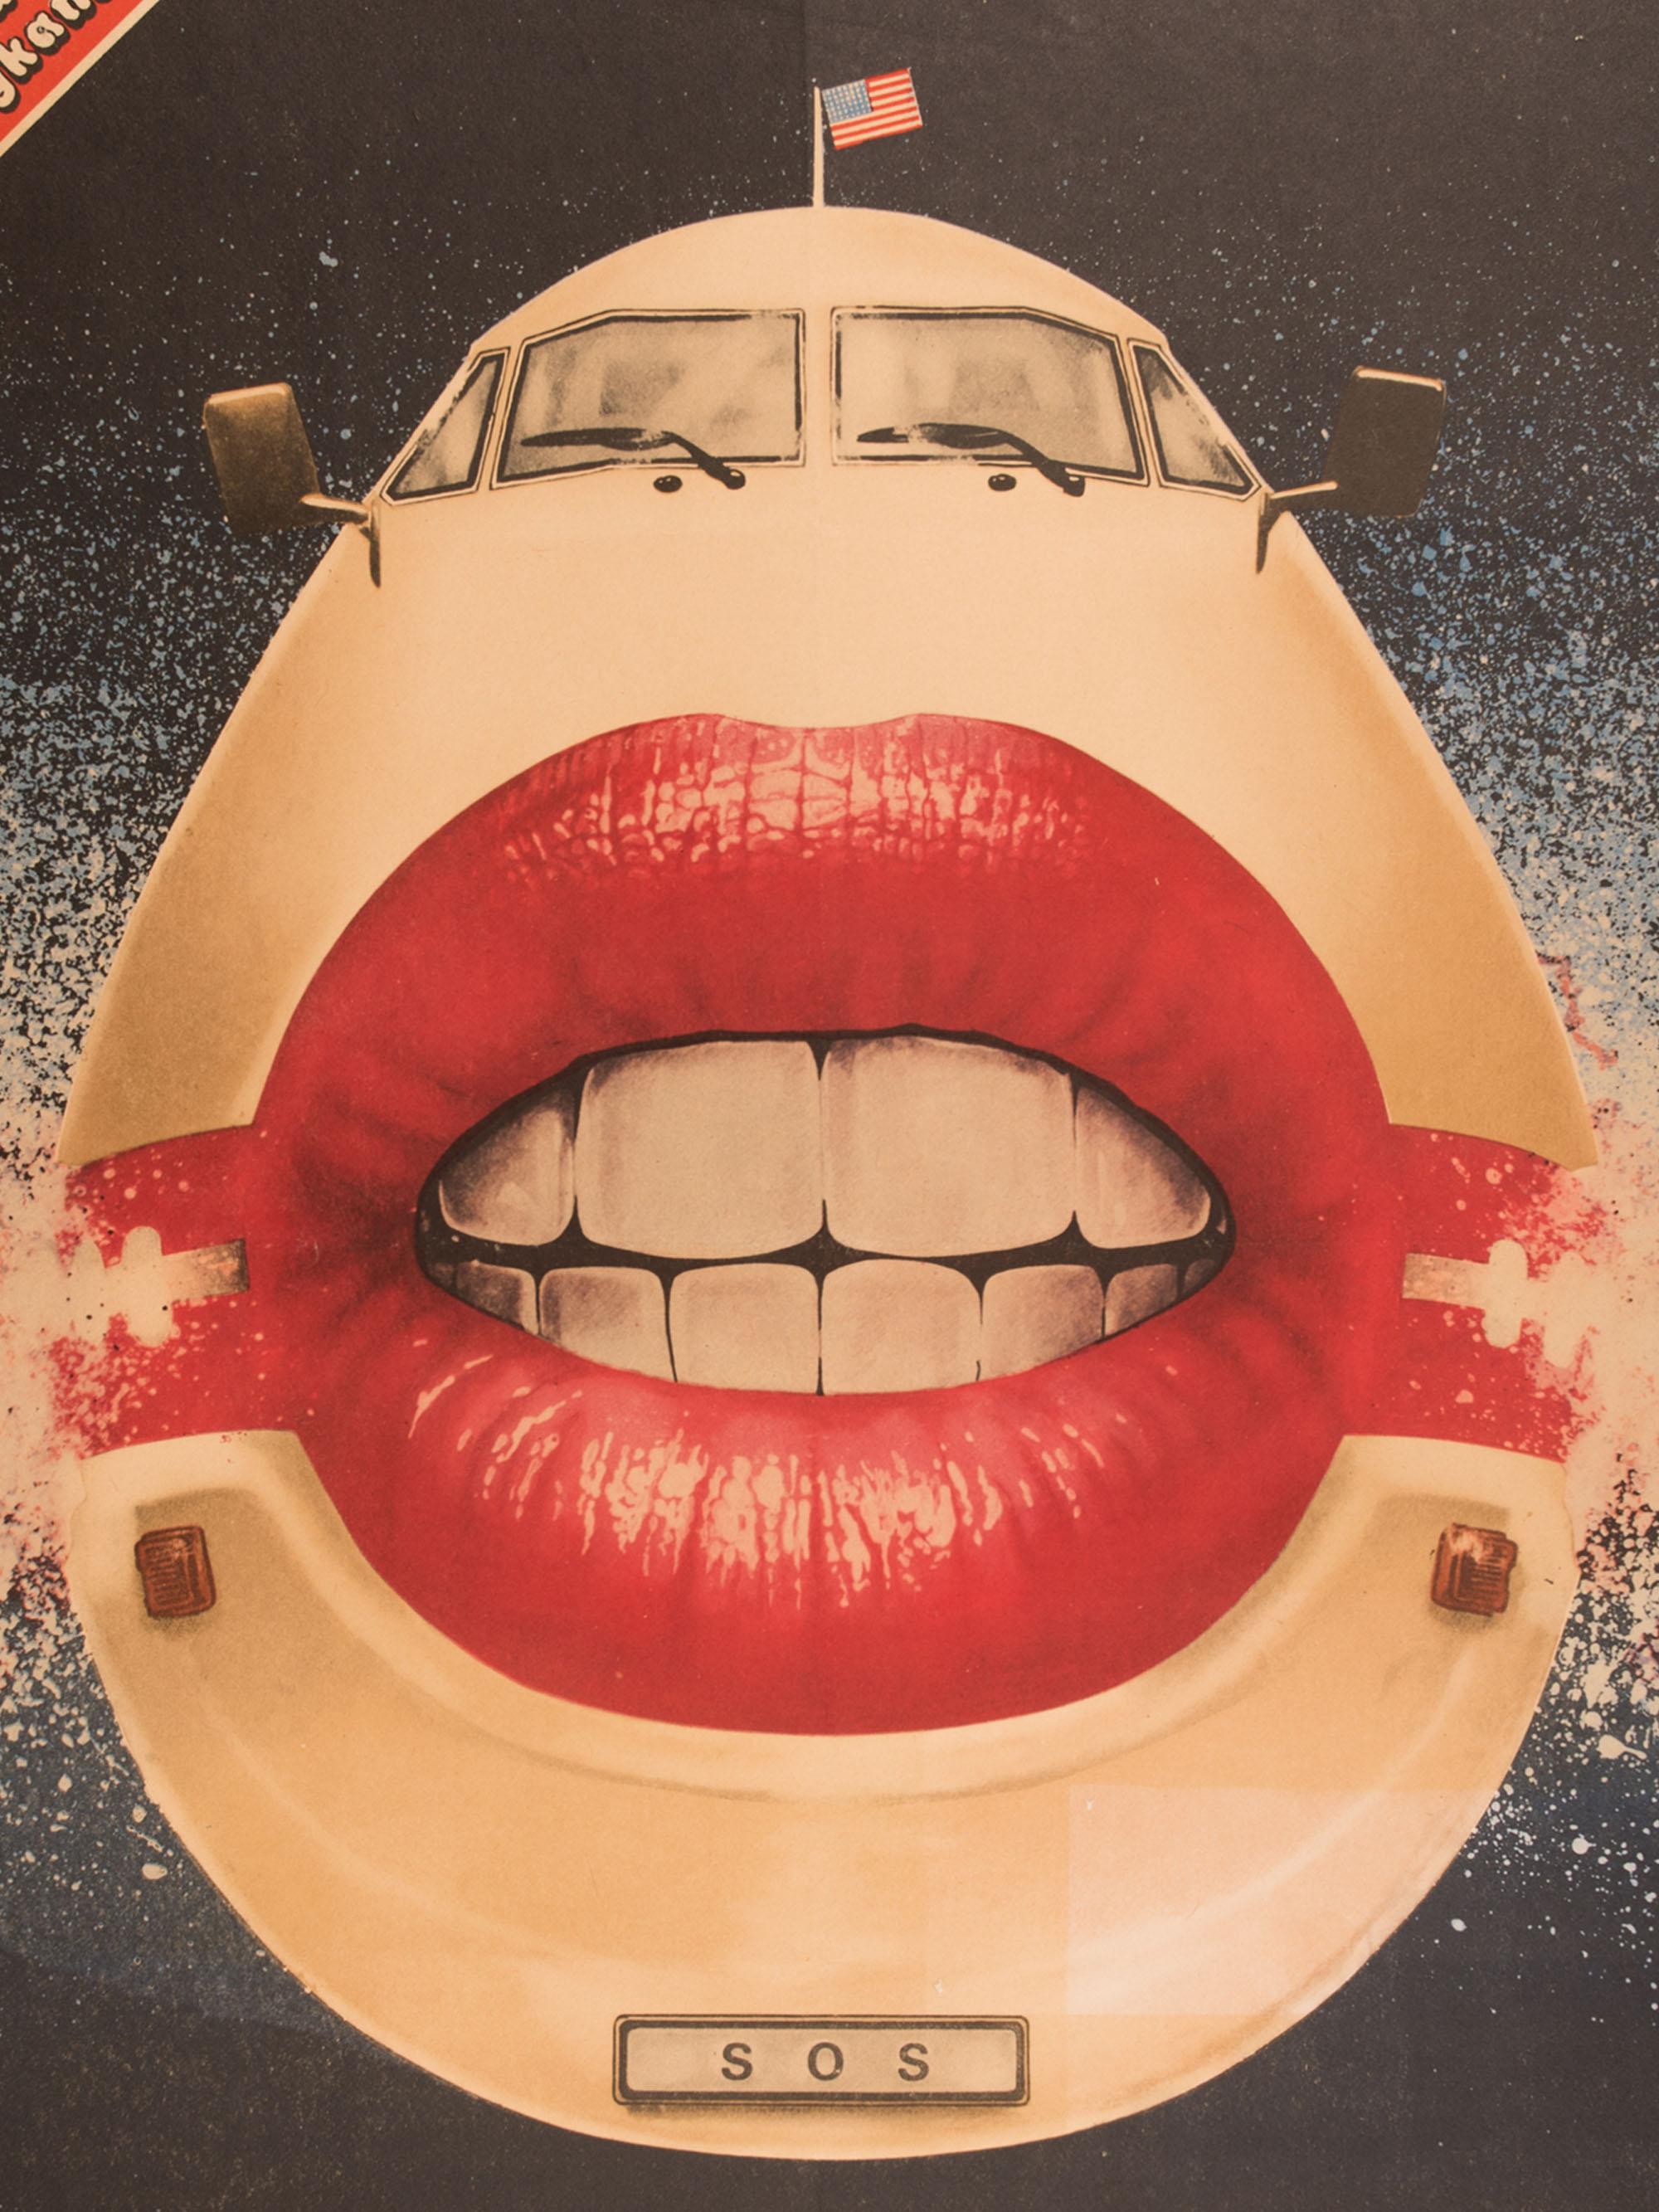 Great original vintage polish movie poster for 'Airplane !', 1980s comedy.